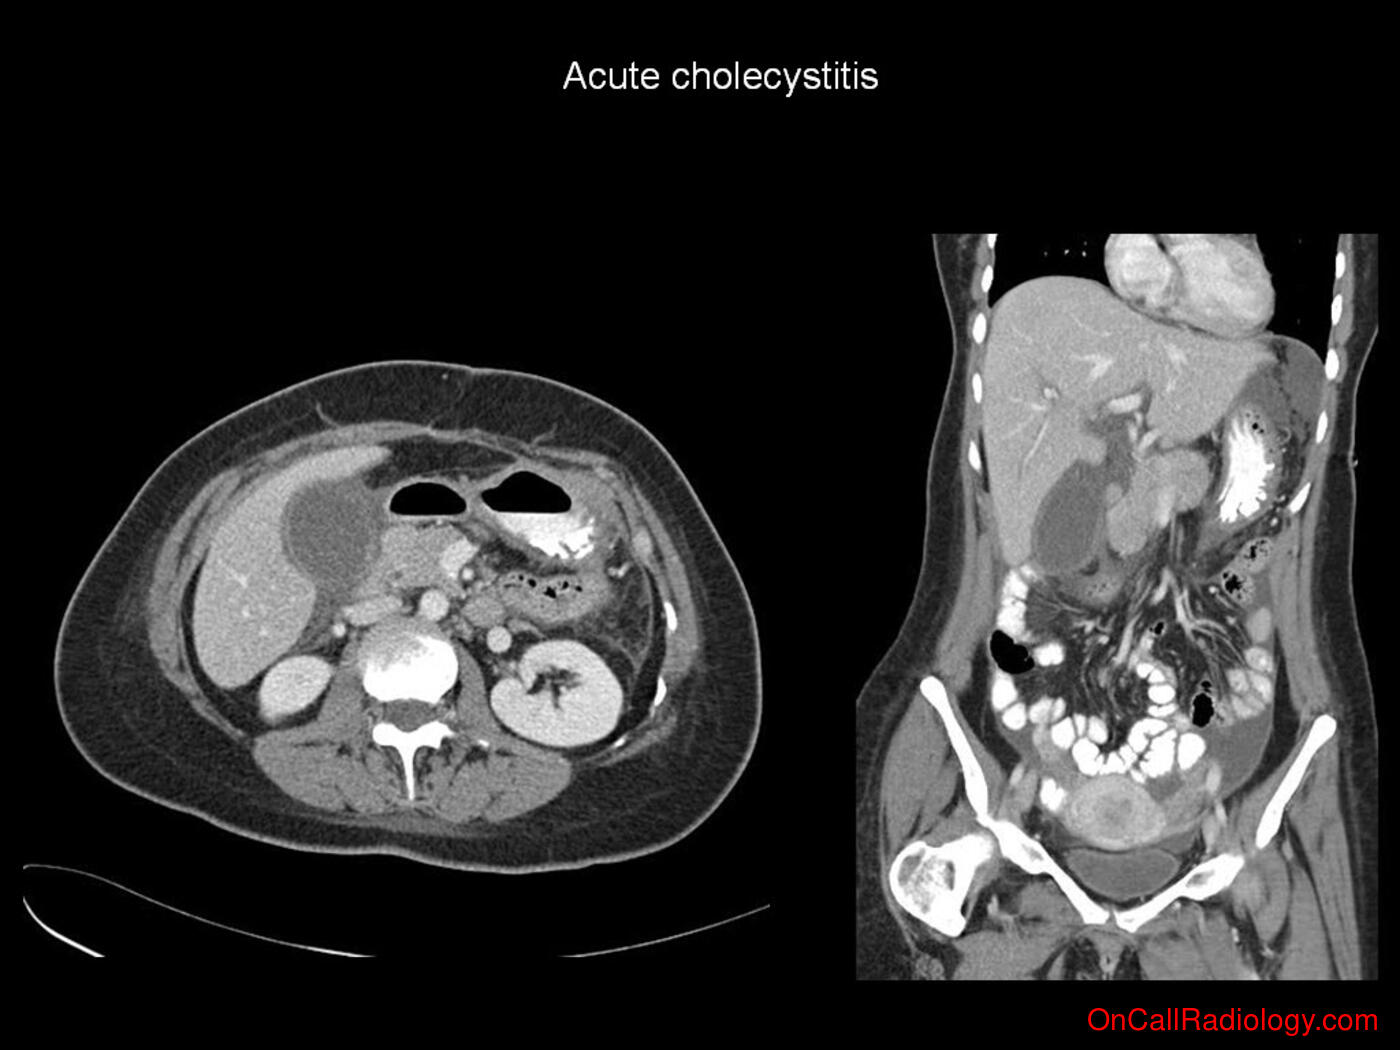 Mass effect (Acute cholecystitis - Plain film, Radiograph, CT, Computed tomography)